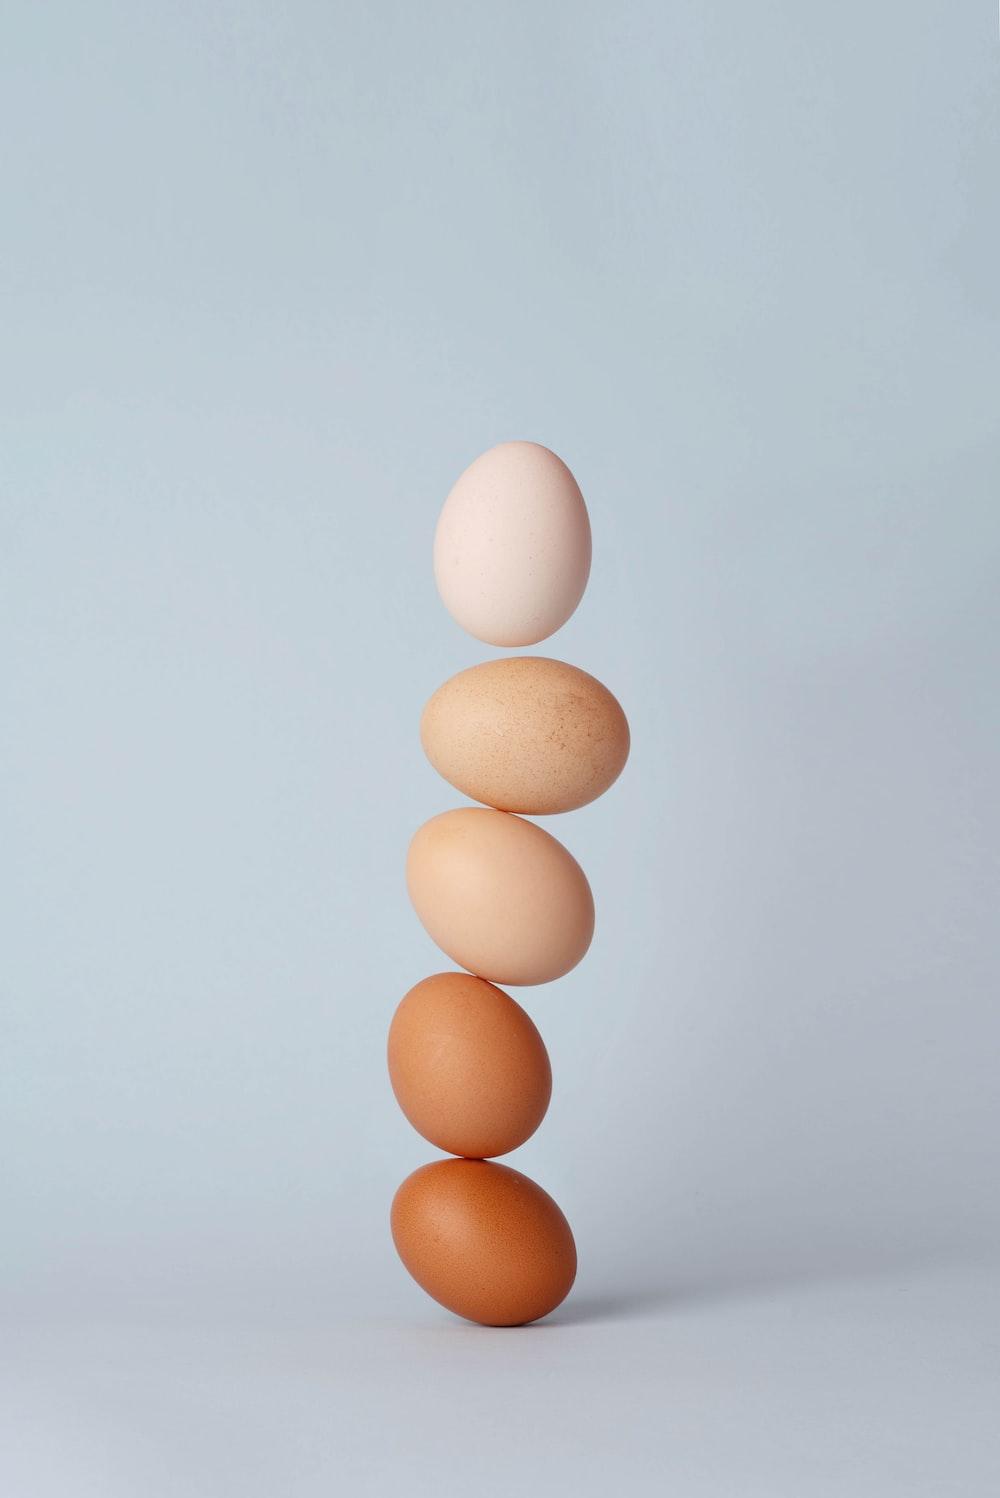 Chicken Egg Pictures Image